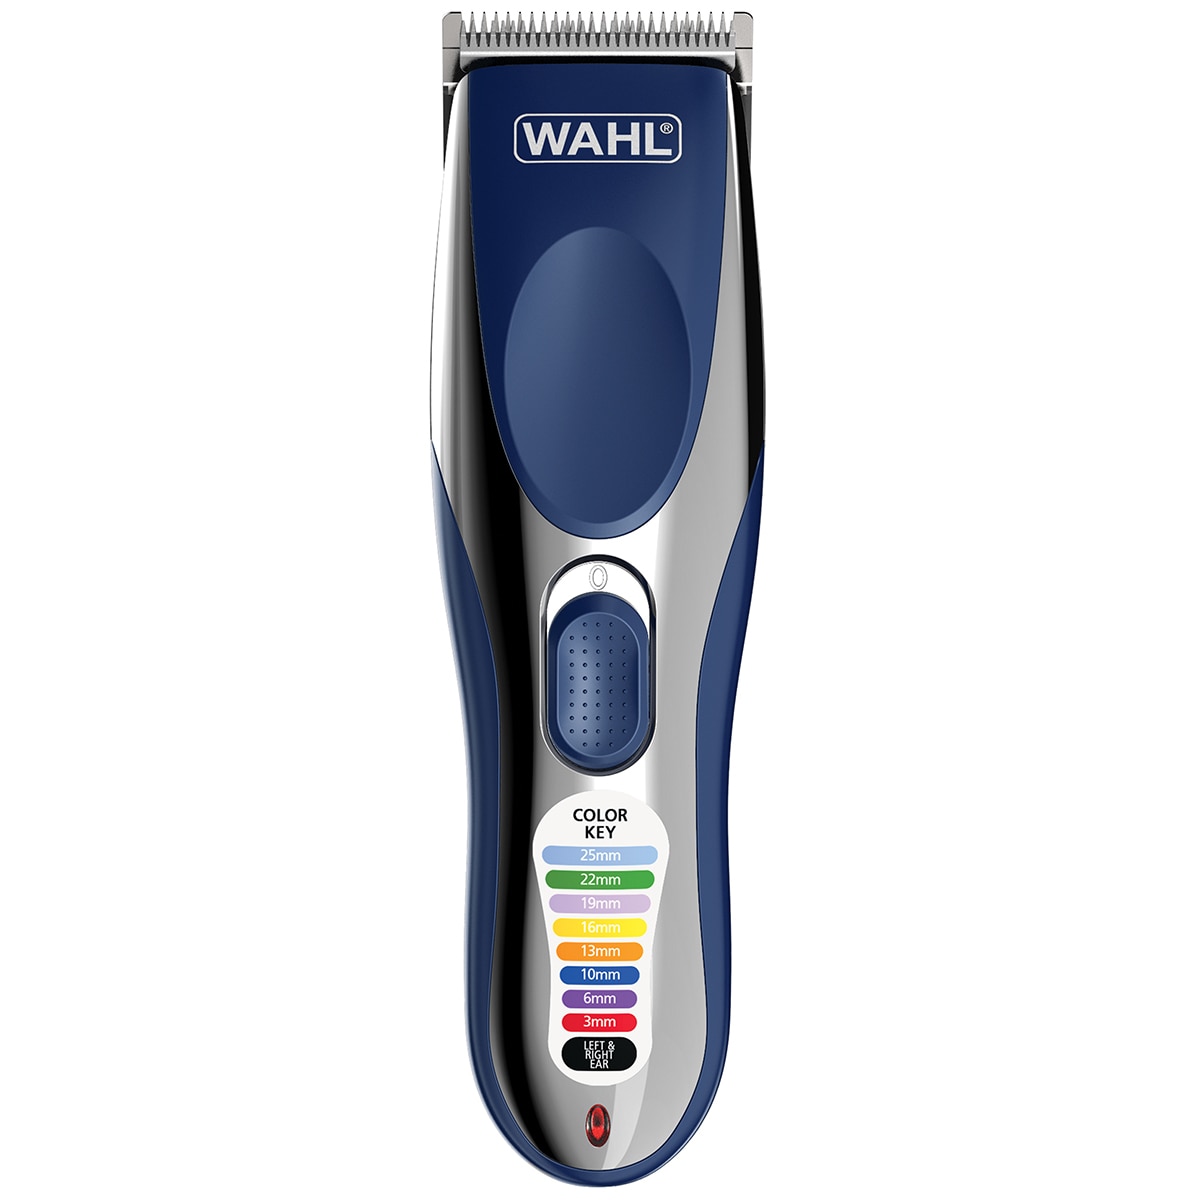 wahl colour pro in stock